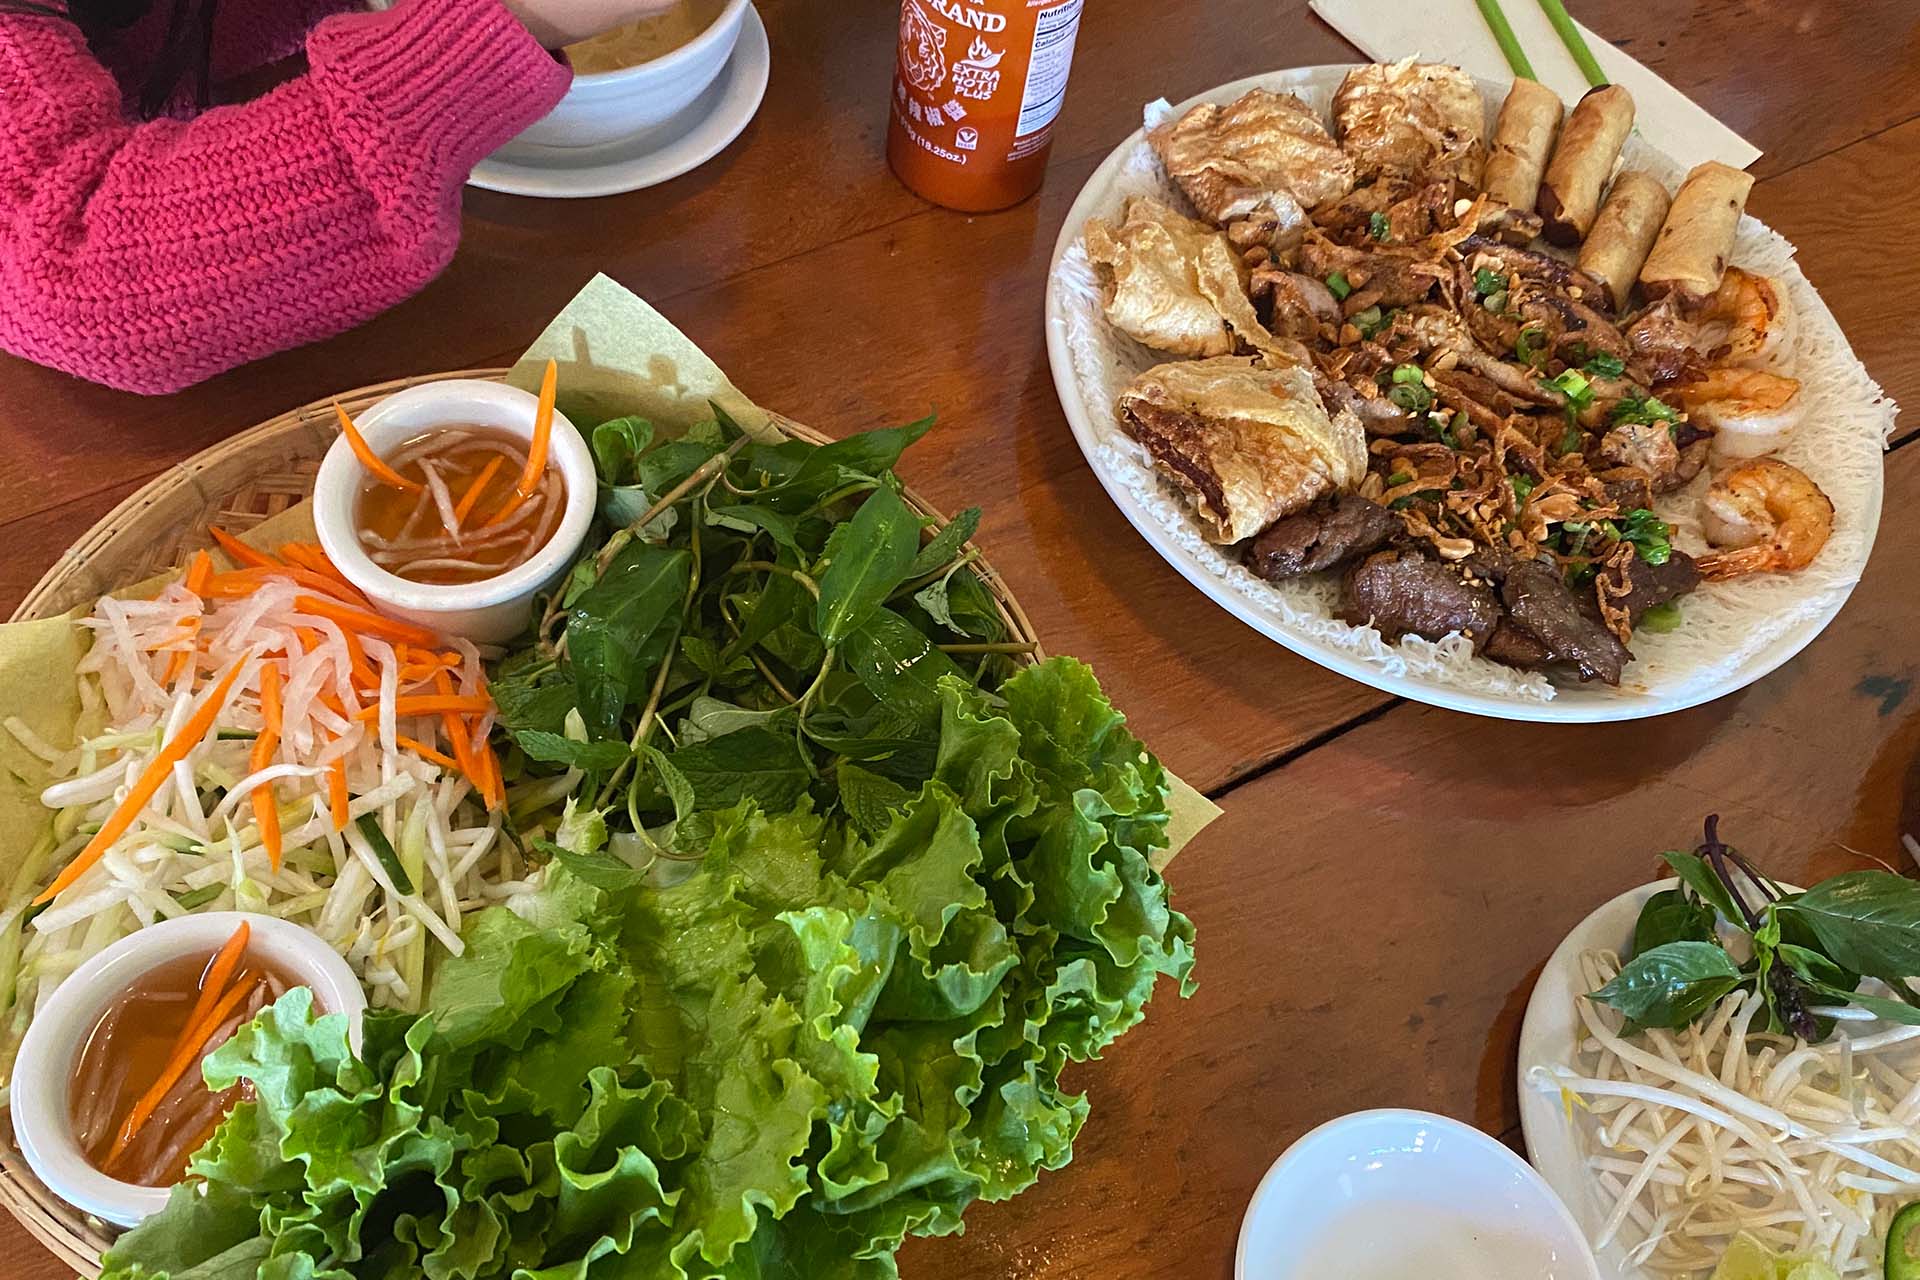 A spread of Vietnamese spring roll fillings next to a plate covered with lettuce and herbs.